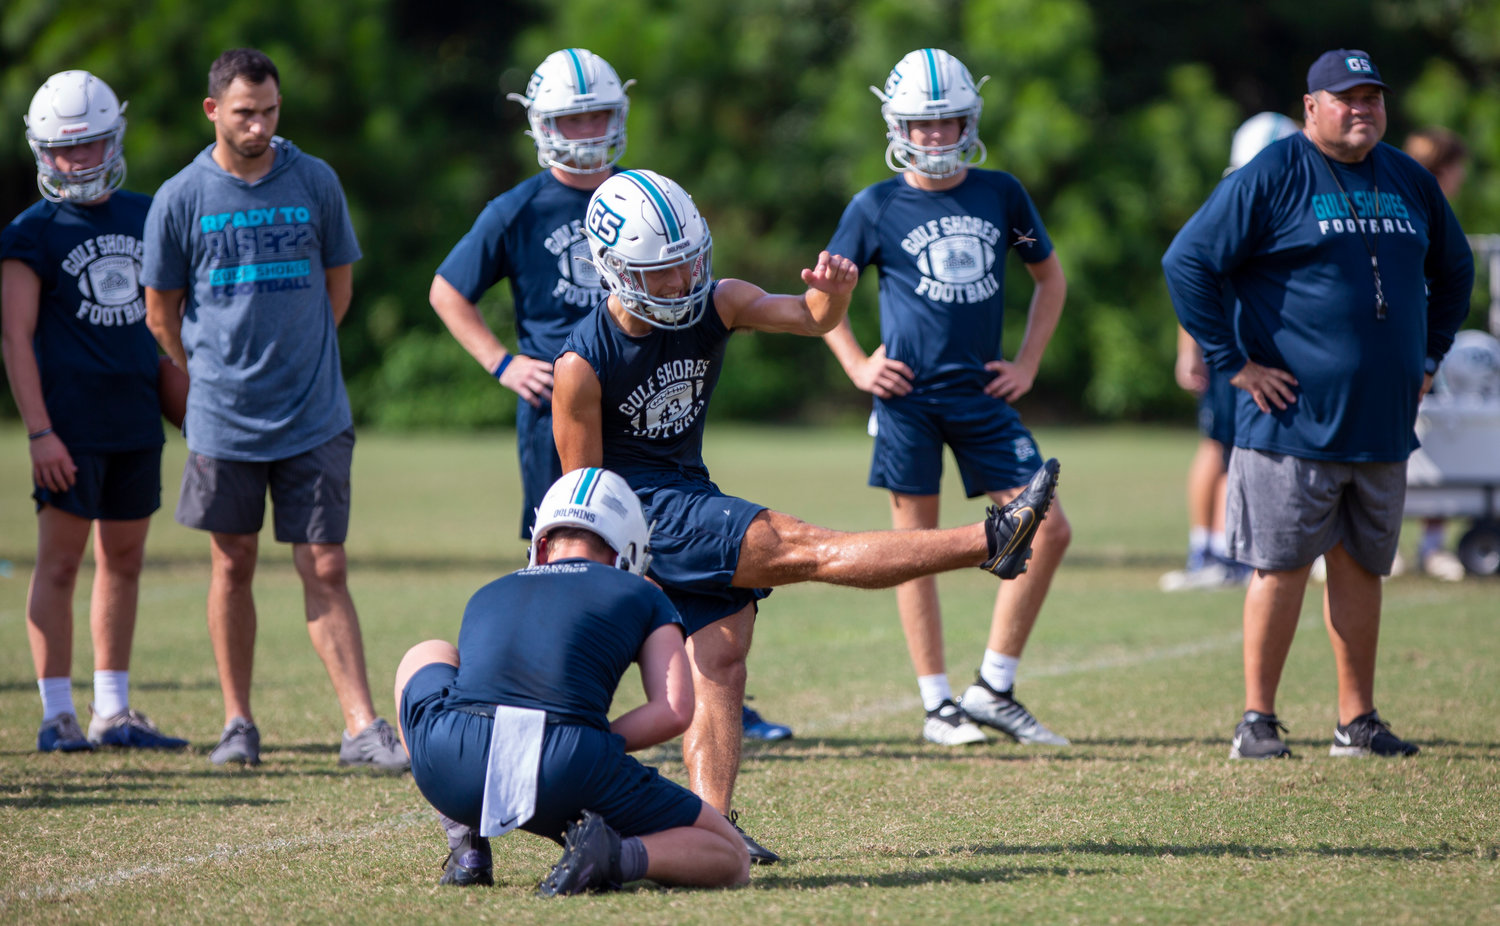 Gulf Shores’ Will Langston follows through on a field-goal attempt during practice Sept. 8, 2022, at the high school. The Dolphins’ rising senior was rated a 5-star kicker and 4.5-star punter by Chris Sailer Kicking this offseason.